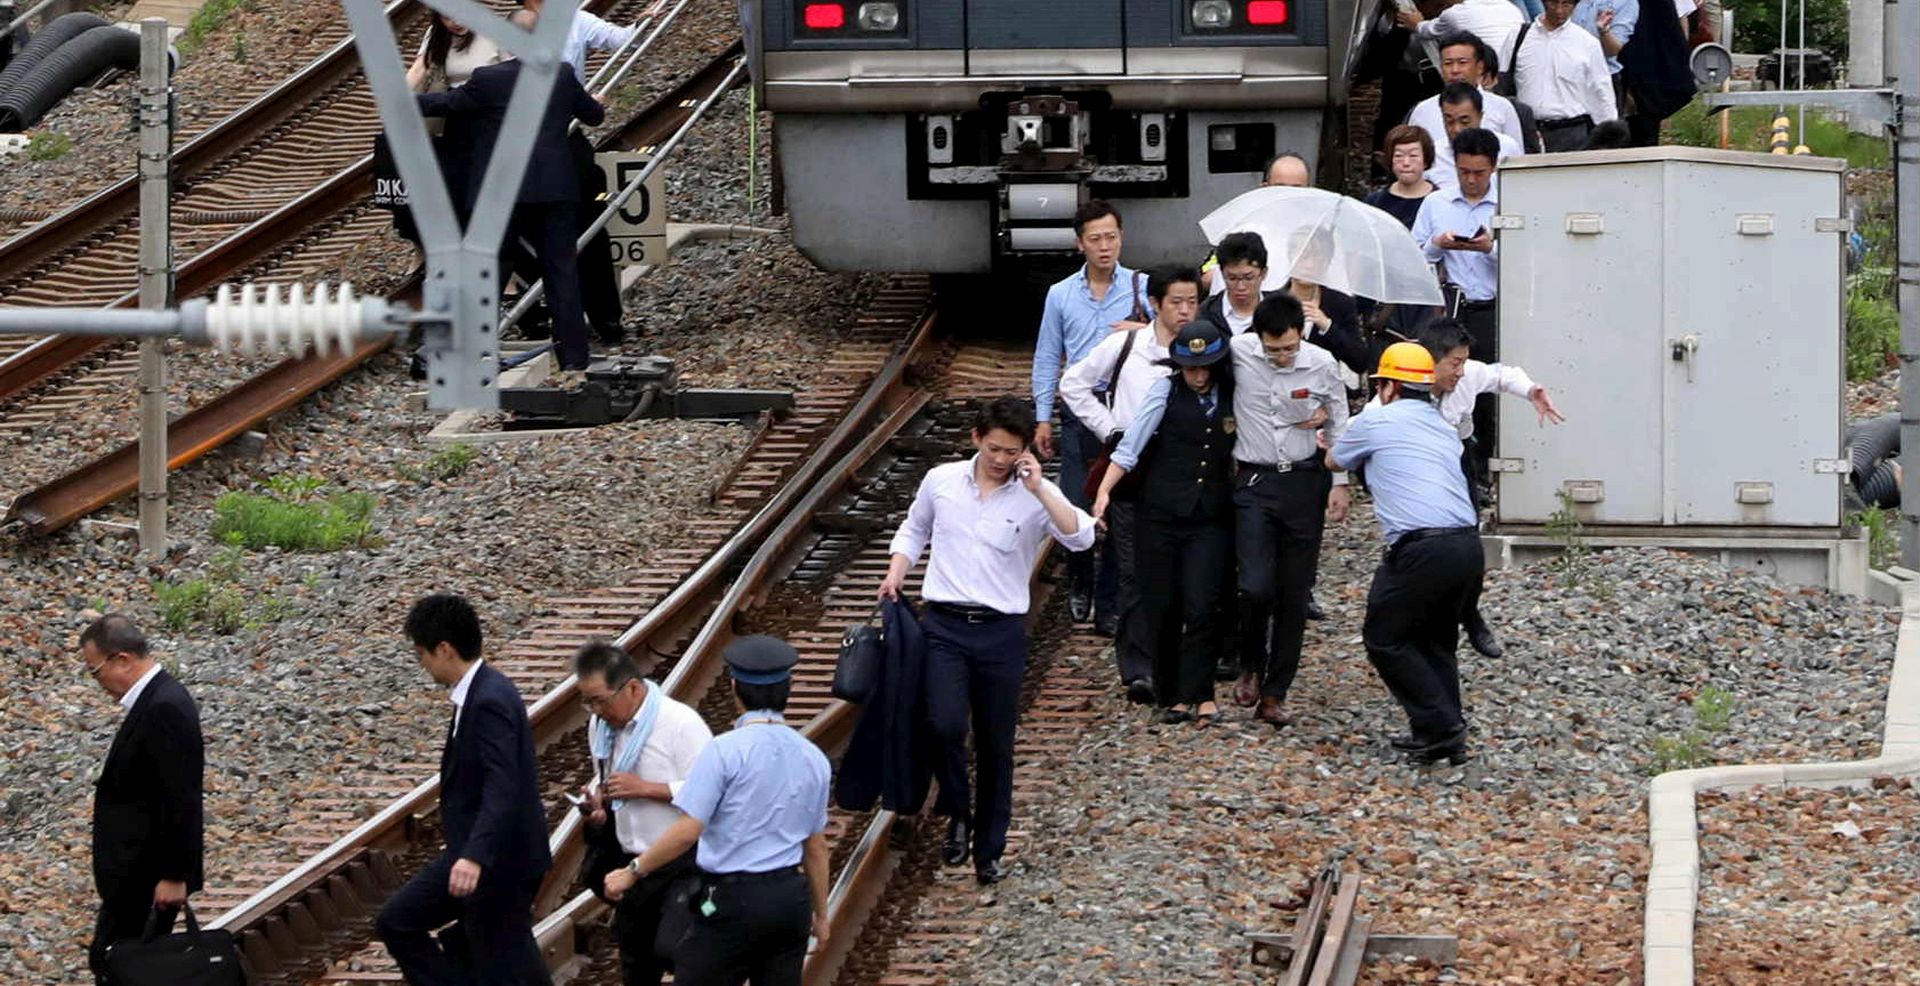 epa06817532 Passengers on board a commuter train walk on the railway due to suspended service, after a magnitude 6.1 earthquake hit western Japan, in Osaka, western Japan, 18 June 2018.  EPA/JIJI PRESS EDITORIAL USE ONLY/NO ARCHIVE/JAPAN OUT  EDITORIAL USE ONLY